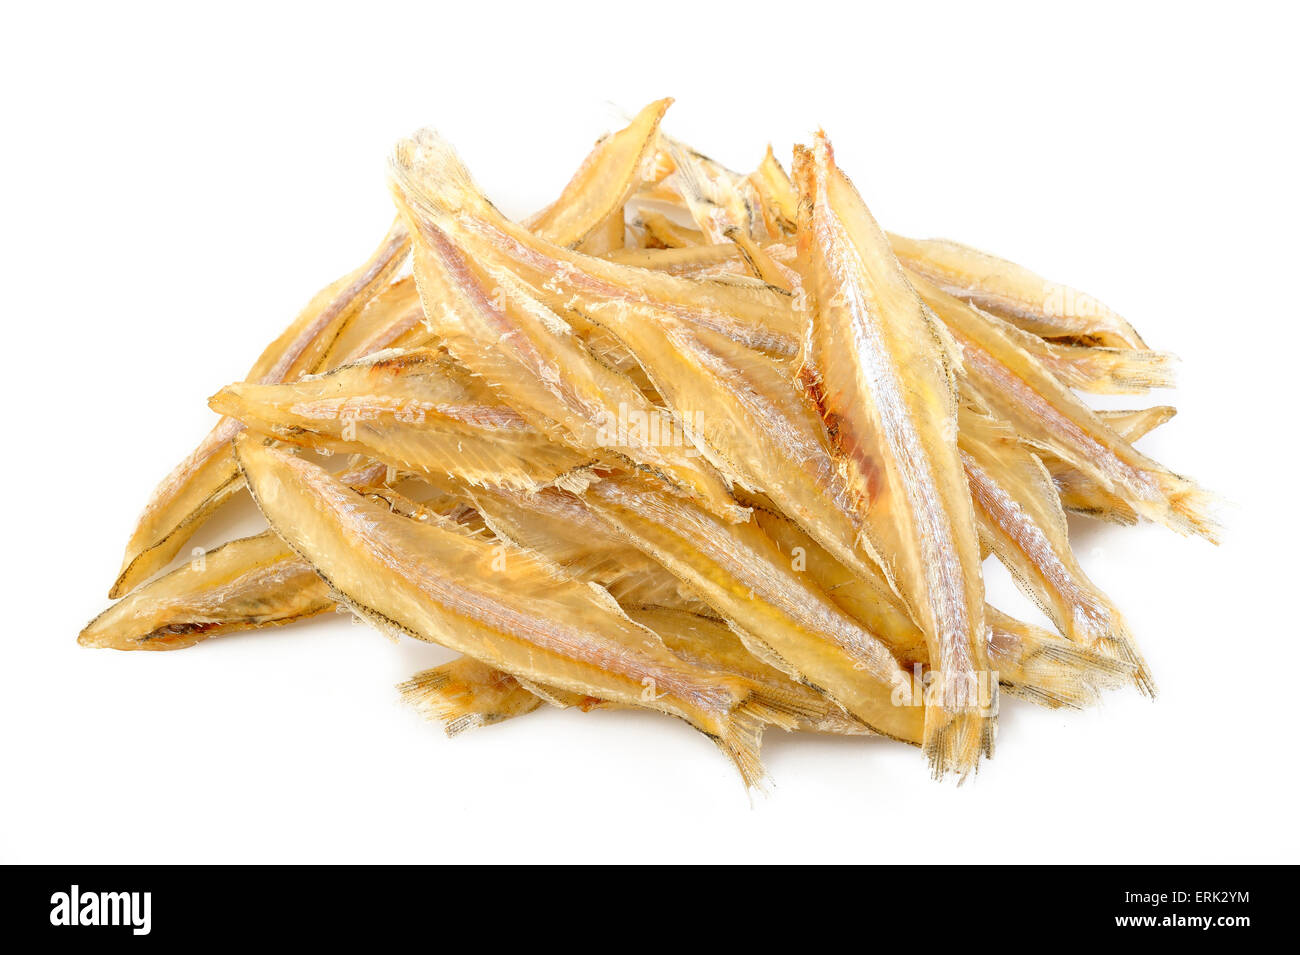 Small dried fish on white background Stock Photo